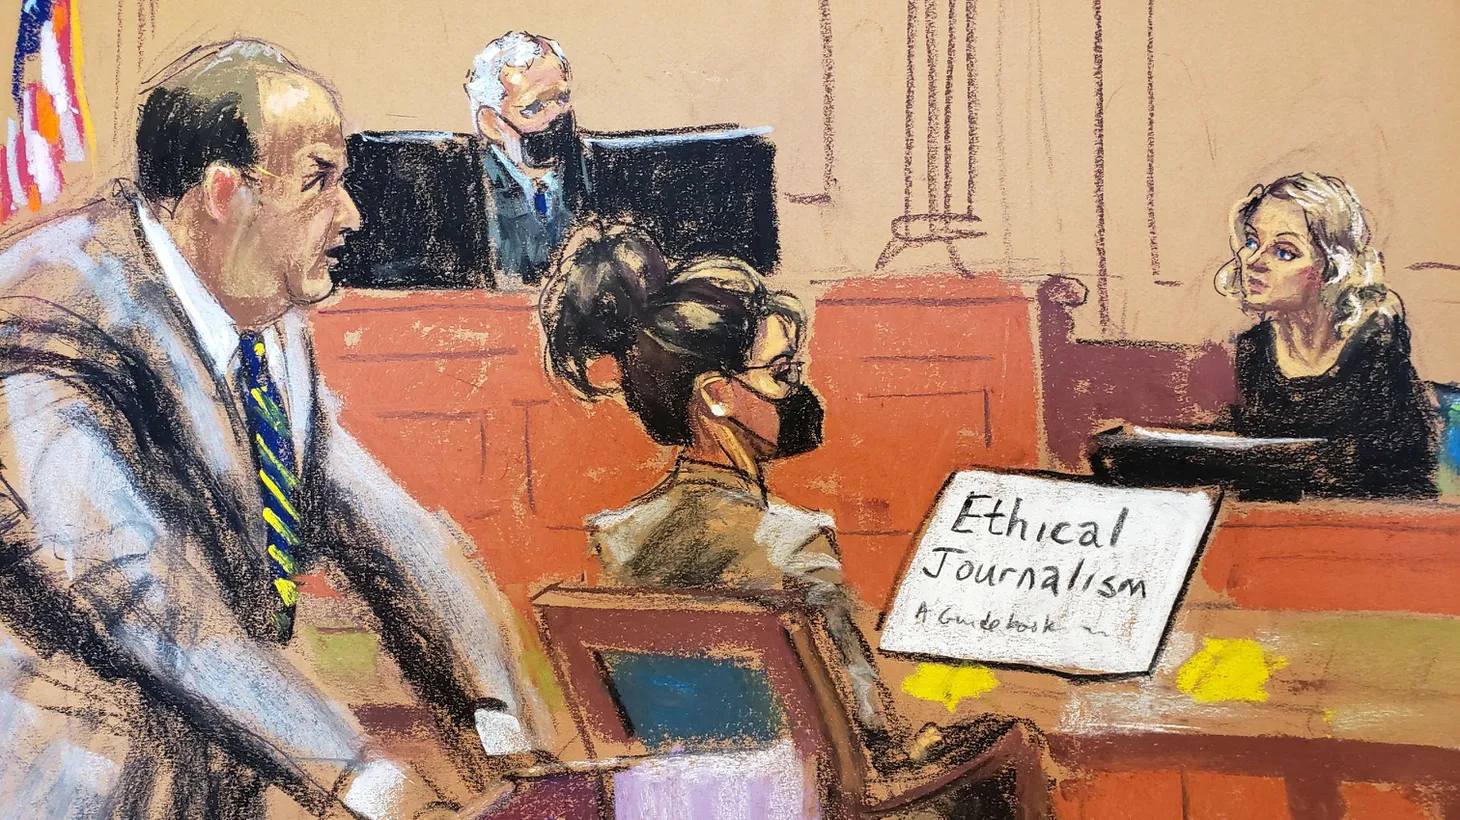 Phoebe Lett is questioned by defense attorney Kenneth Turkel as Sarah Palin, 2008 Republican vice presidential candidate and former Alaska governor, listens during Palin's defamation lawsuit trial against the New York Times, at the United States Courthouse in the Manhattan borough of New York City, U.S., February 7, 2022 in this courtroom sketch.